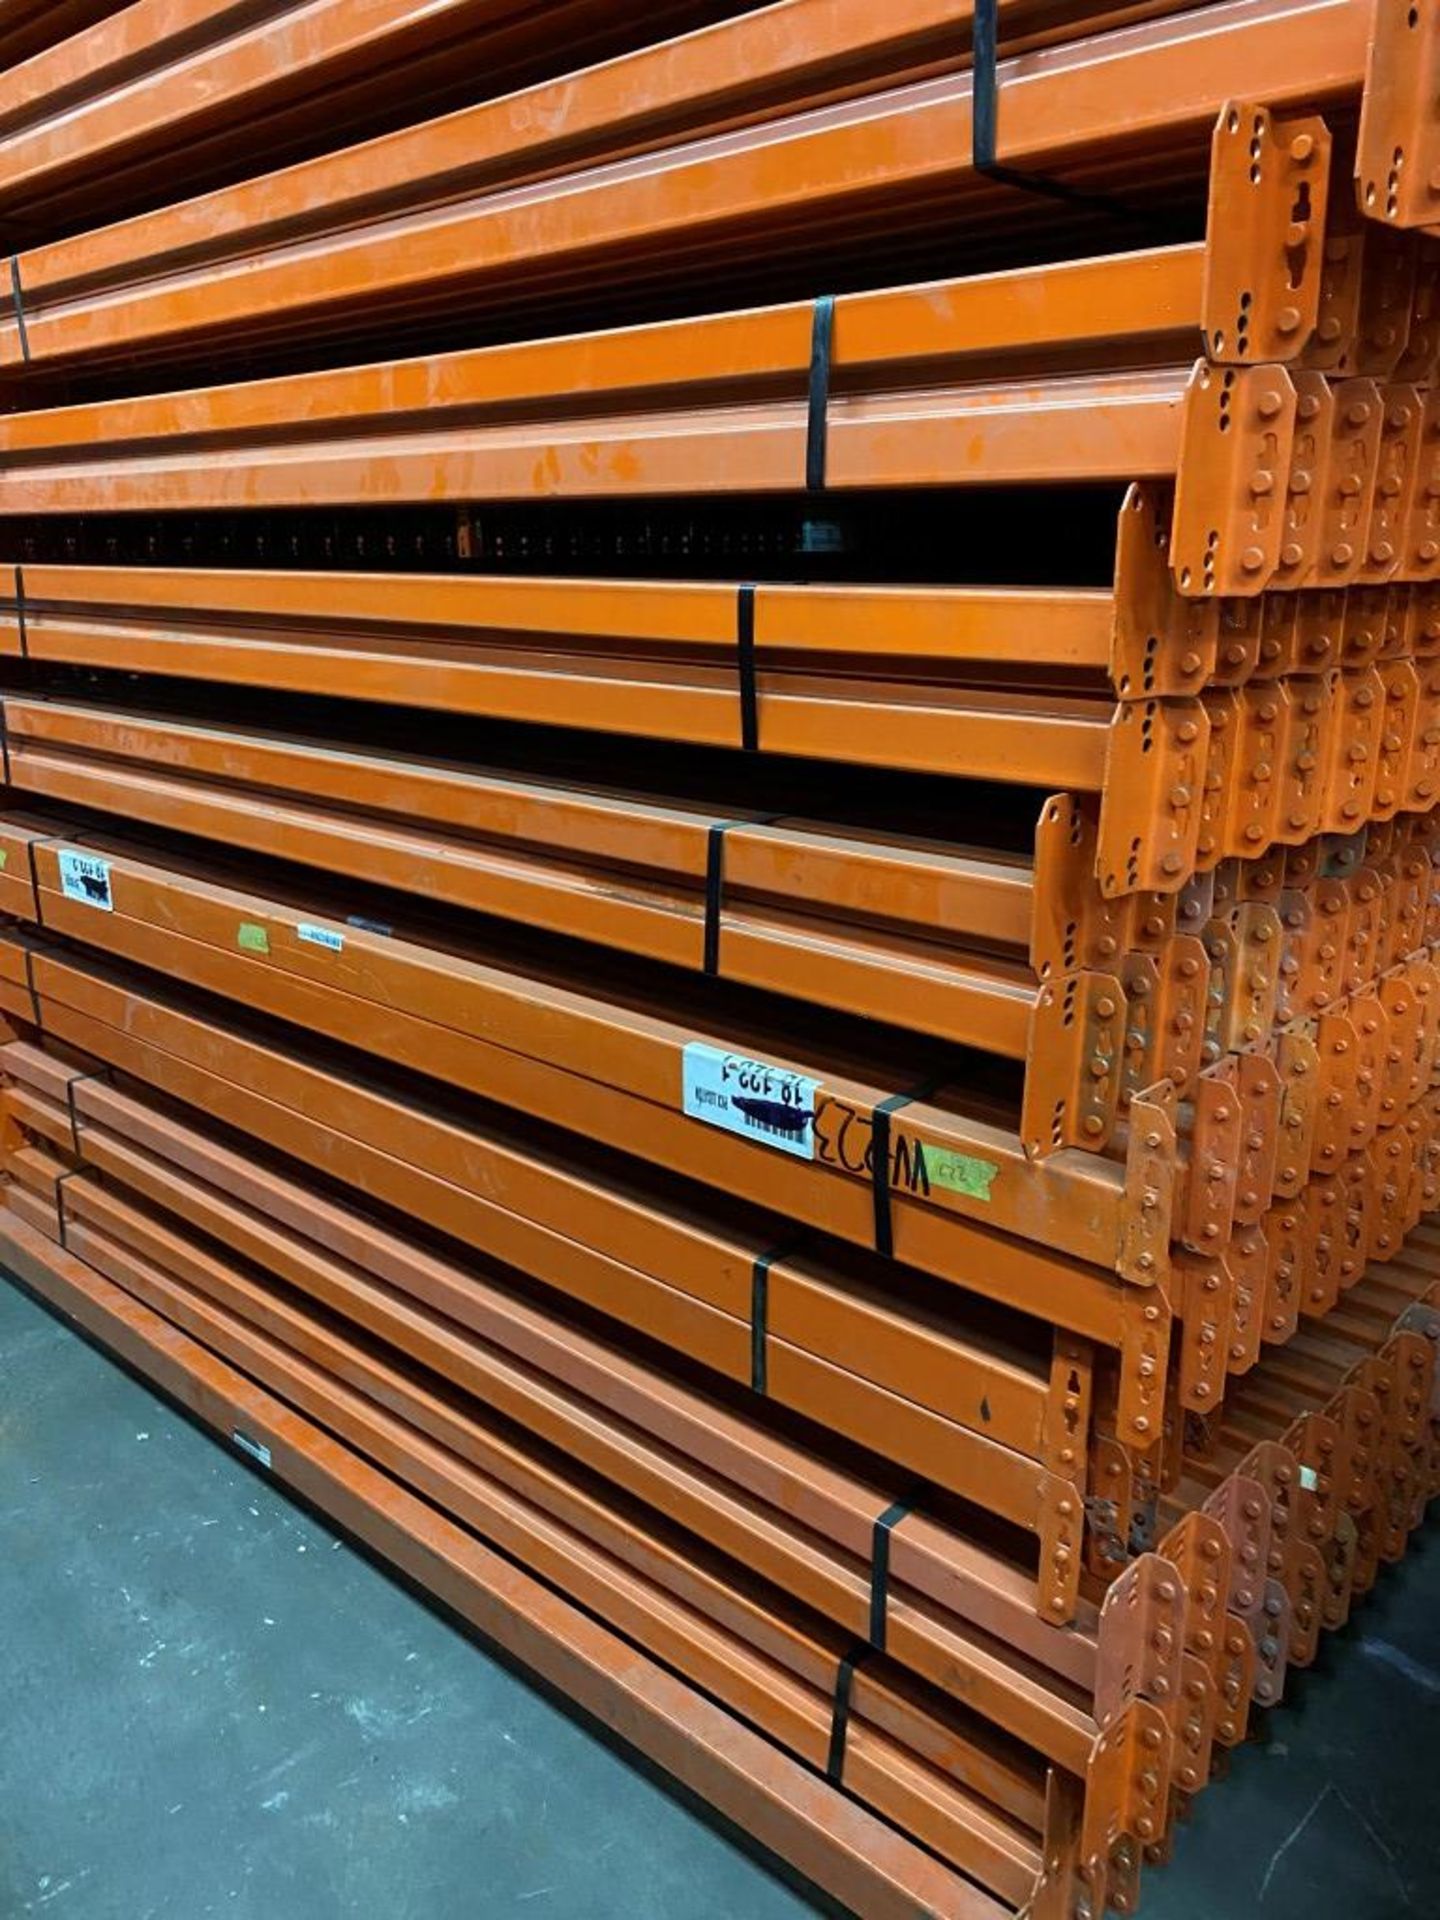 One Lot of Teardrop style Pallet Racks - 9 bays x 3lines x 8'H x 24"D x 96"W with 3 beam levels. - Image 3 of 4